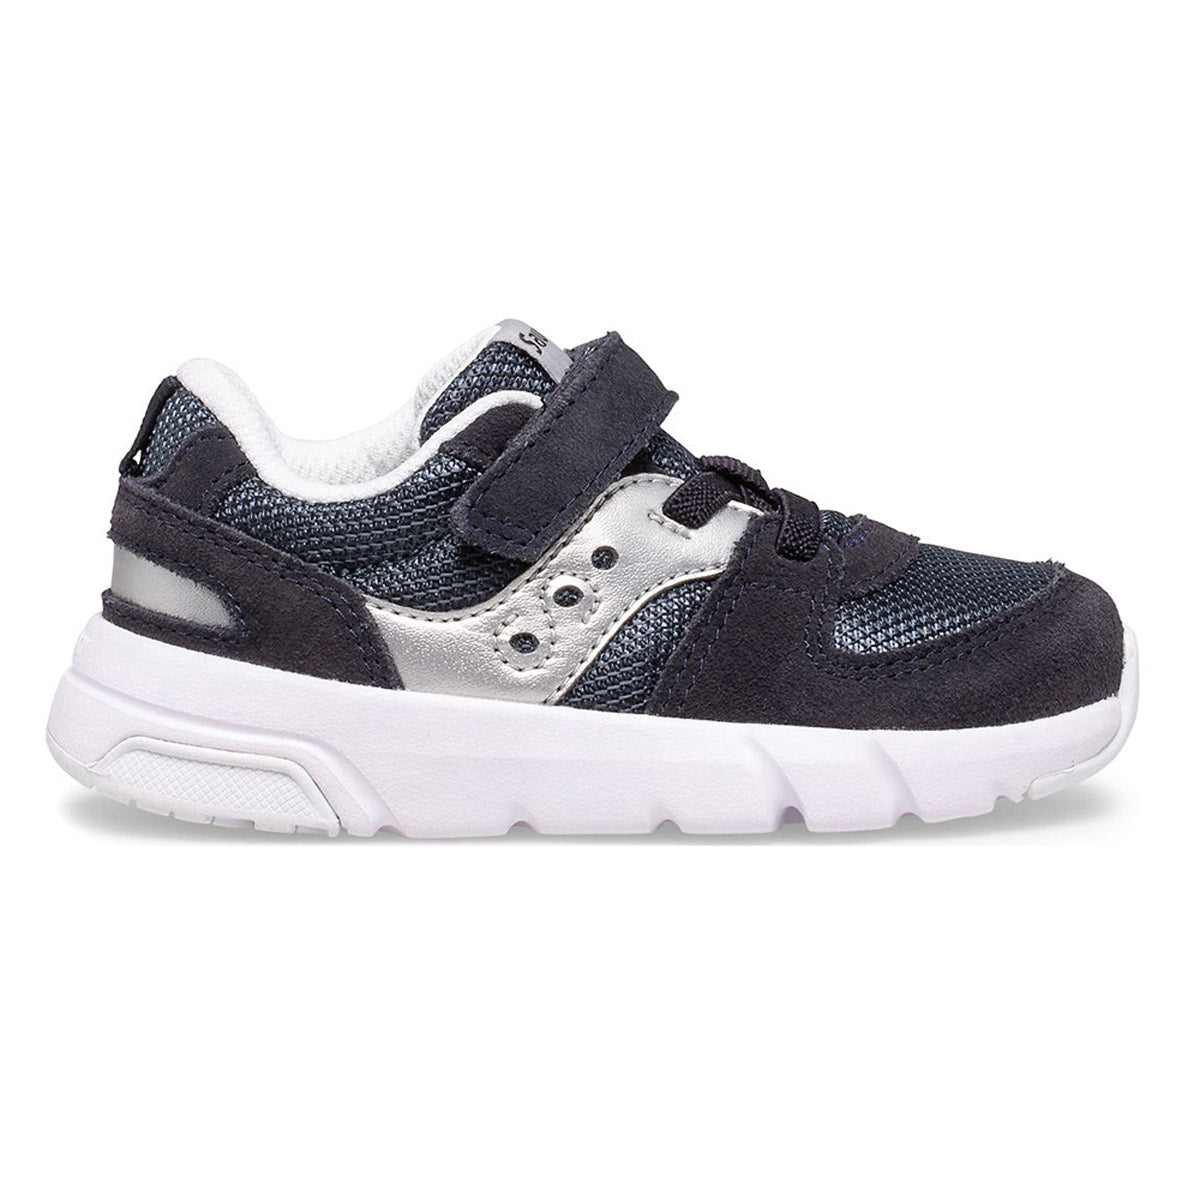 A single Saucony navy blue toddler&#39;s sneaker with velcro straps, reinforced toes, and a white sole.